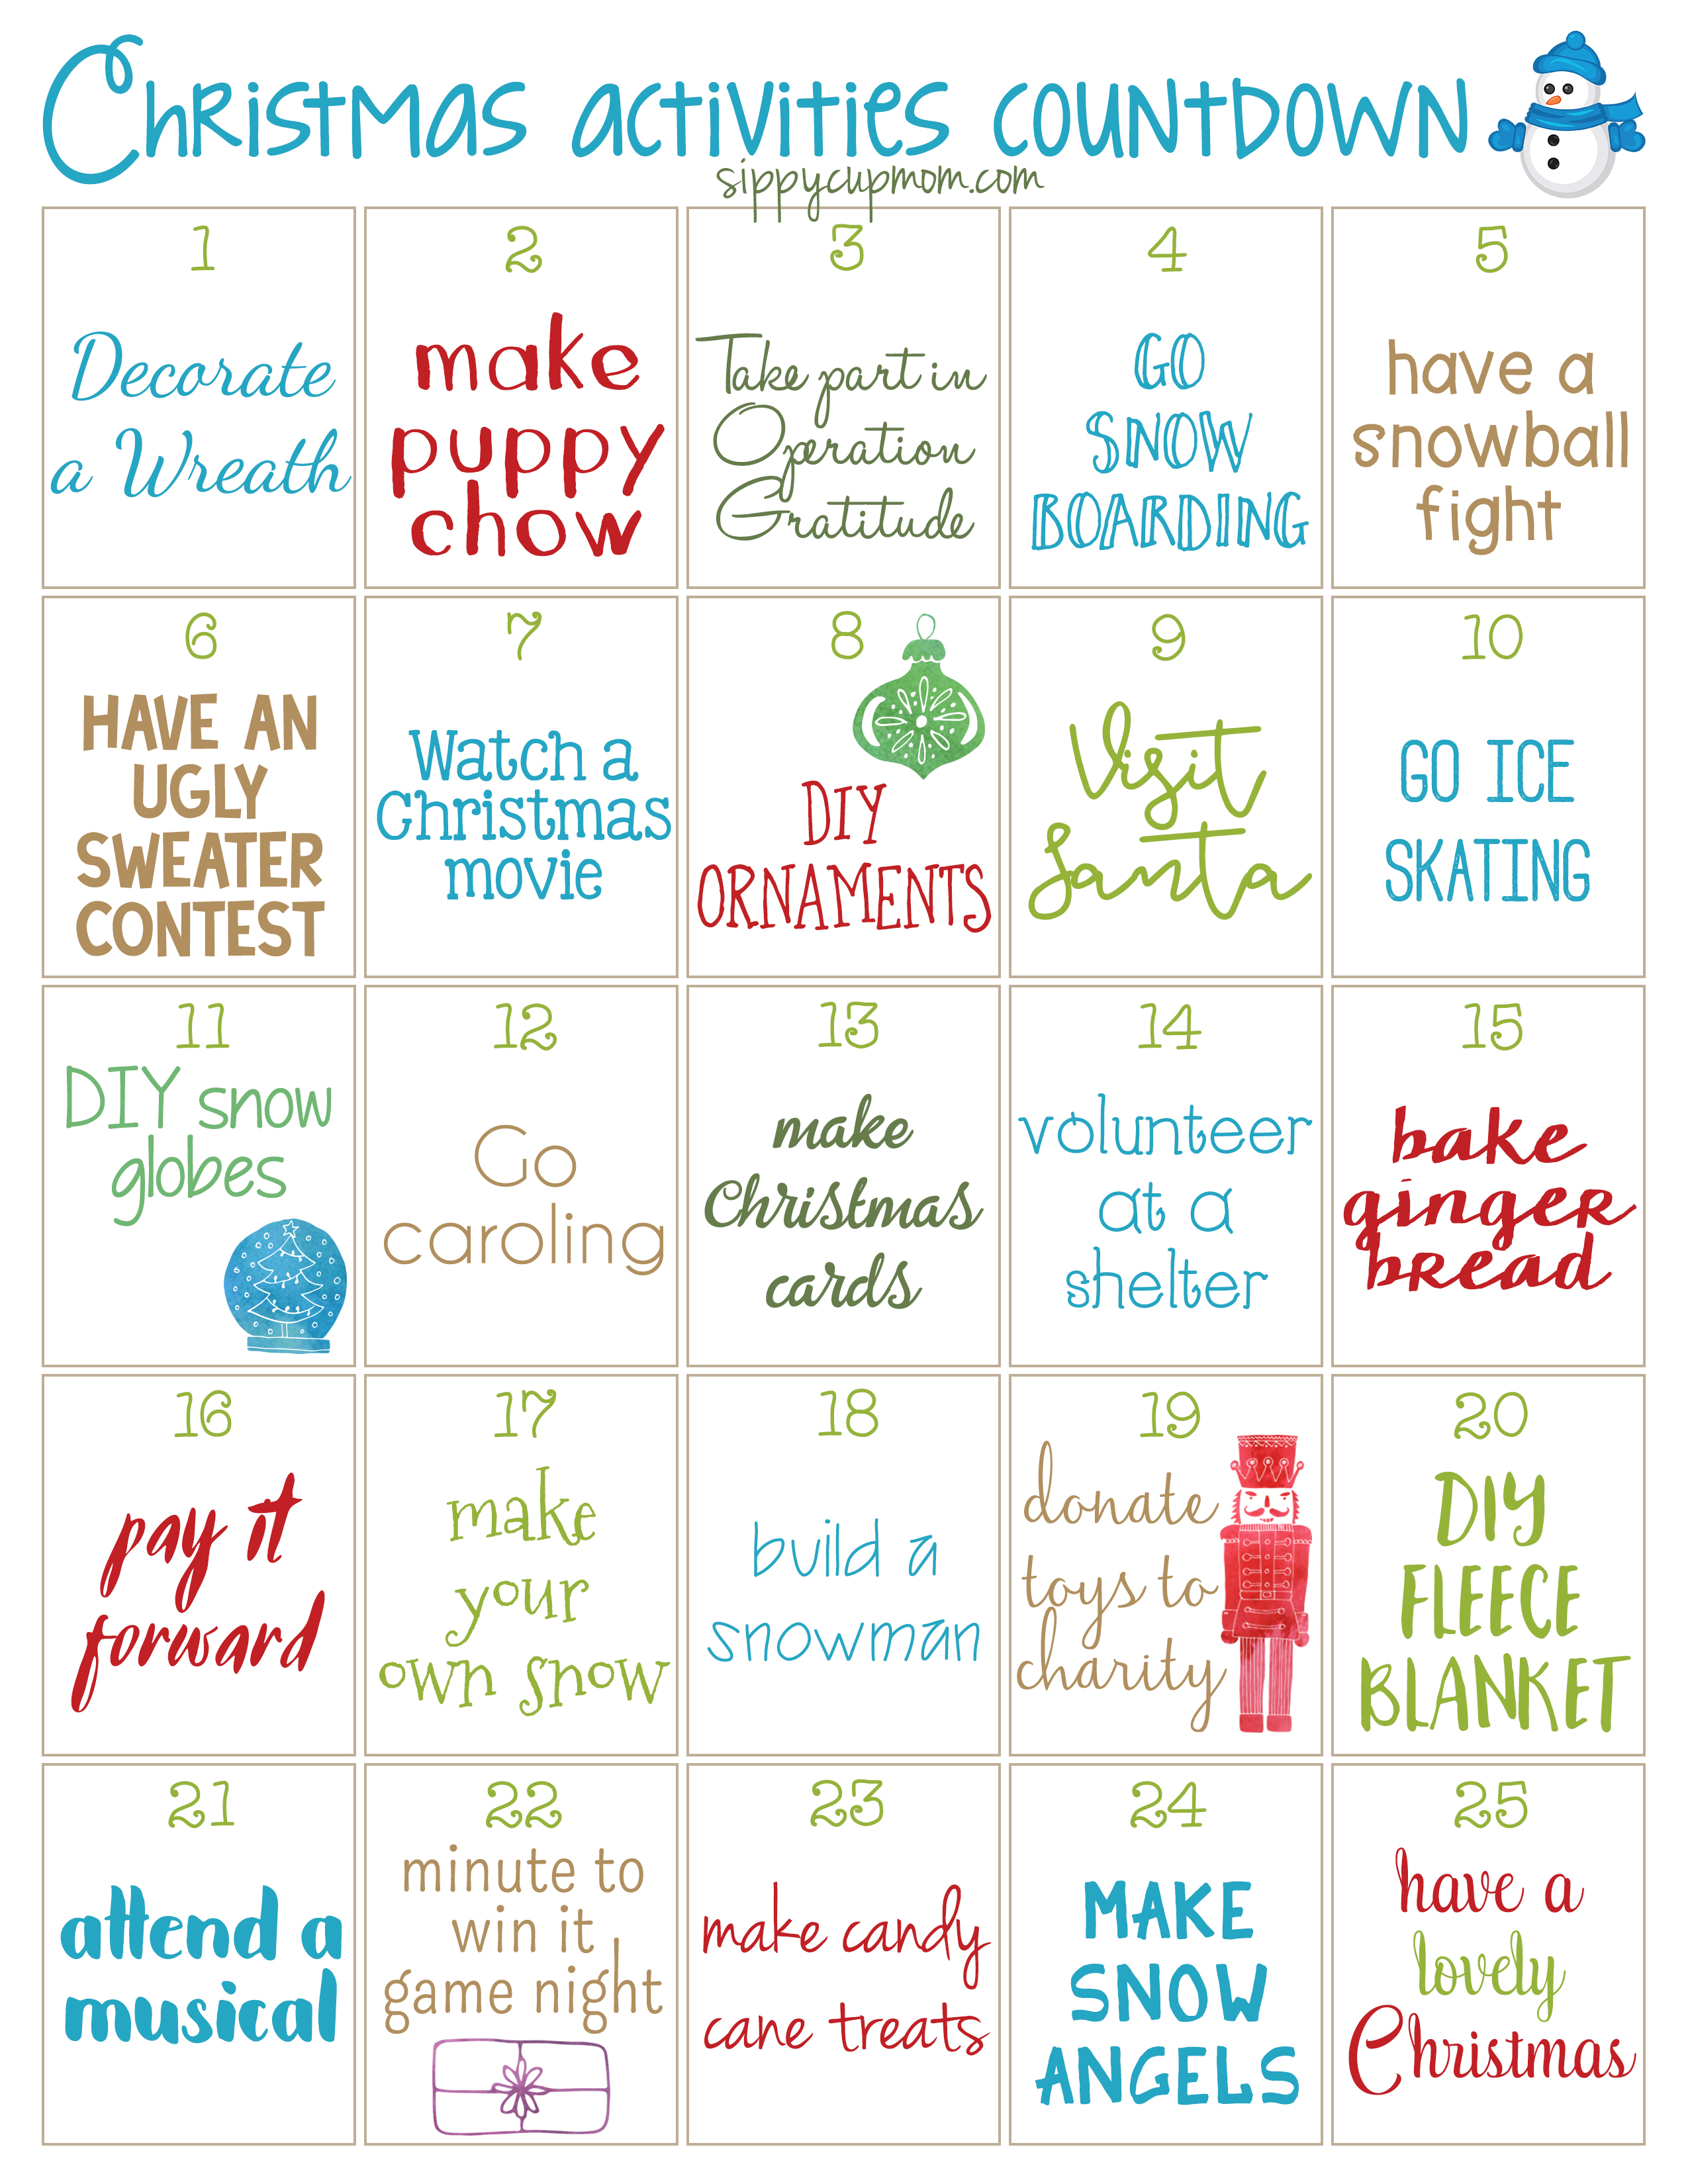 25 Days of Christmas Activities Calendar - Sippy Cup Mom